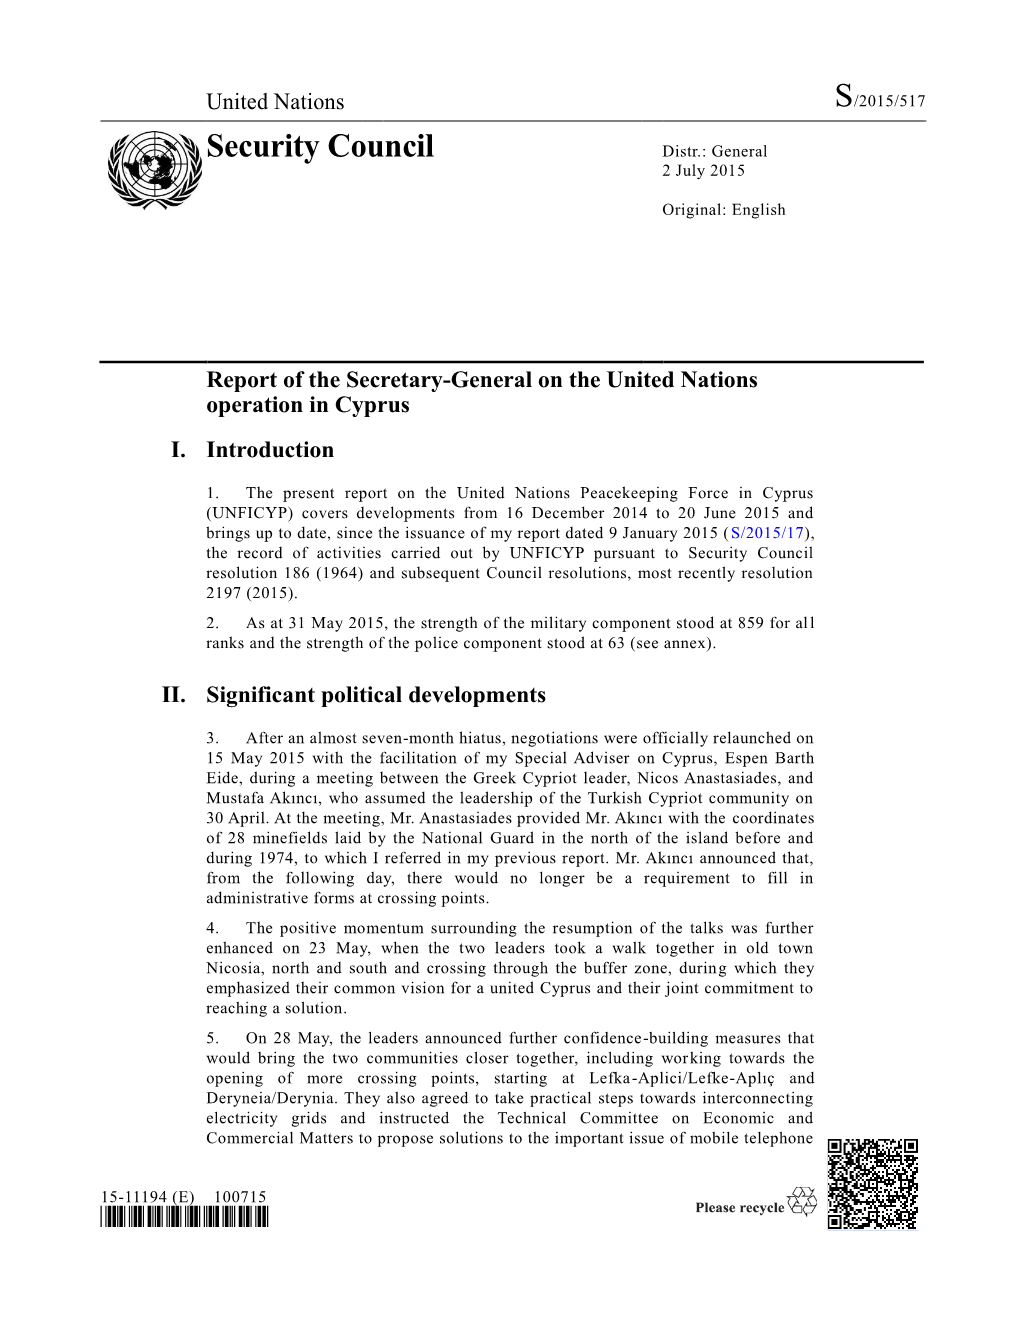 Report of the Secretary-General on the United Nations Operation in Cyprus